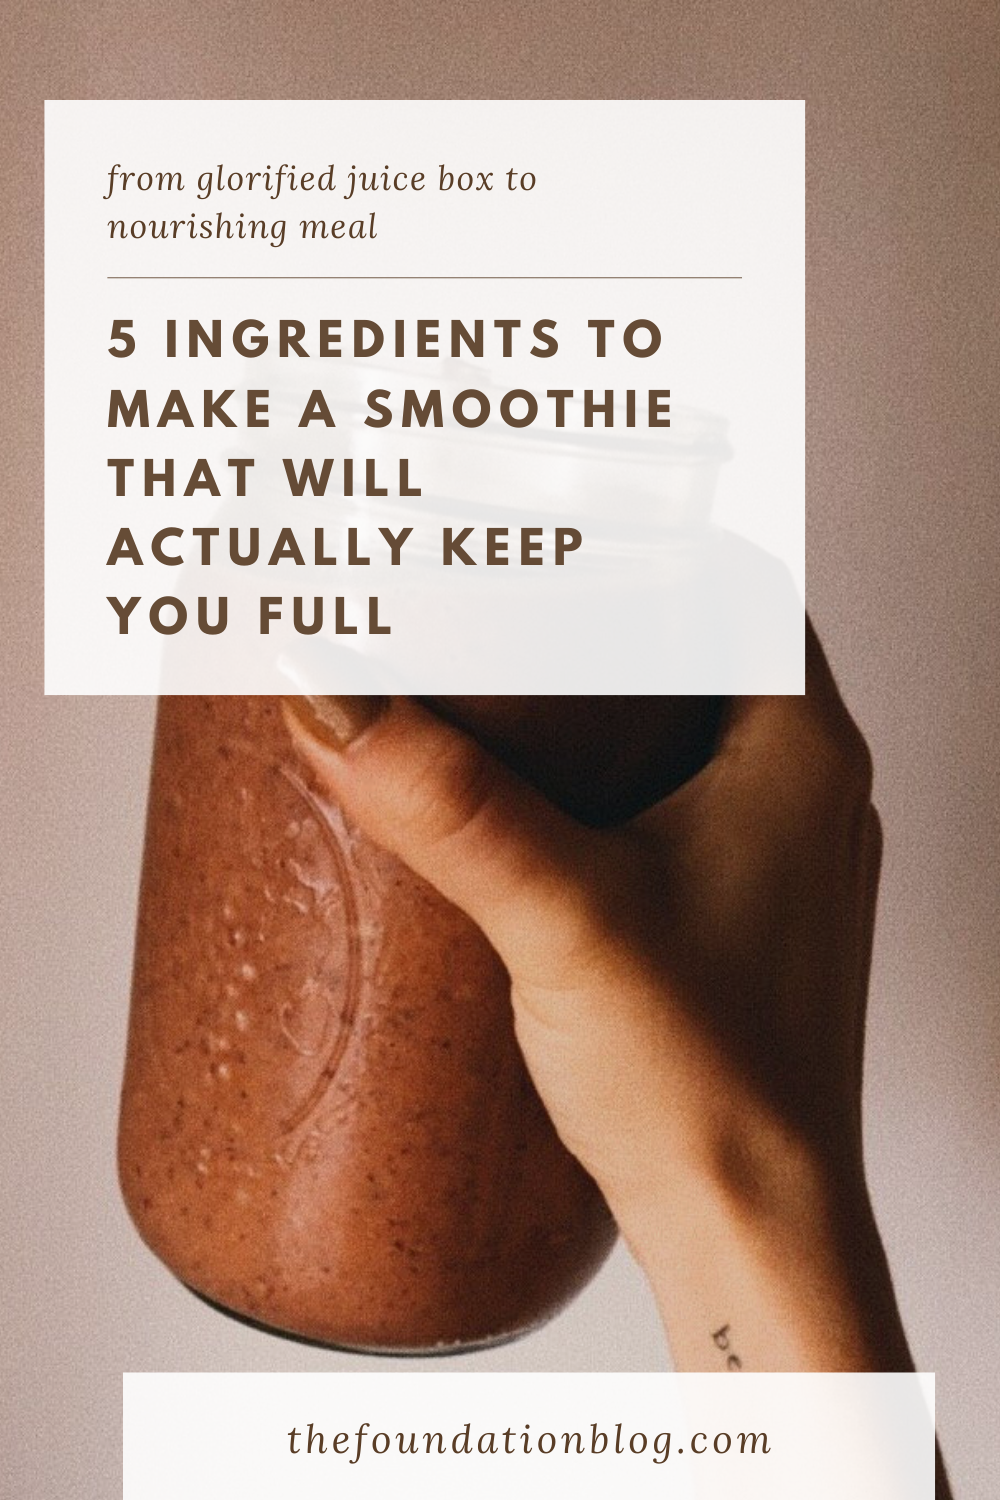 Smoothie tips